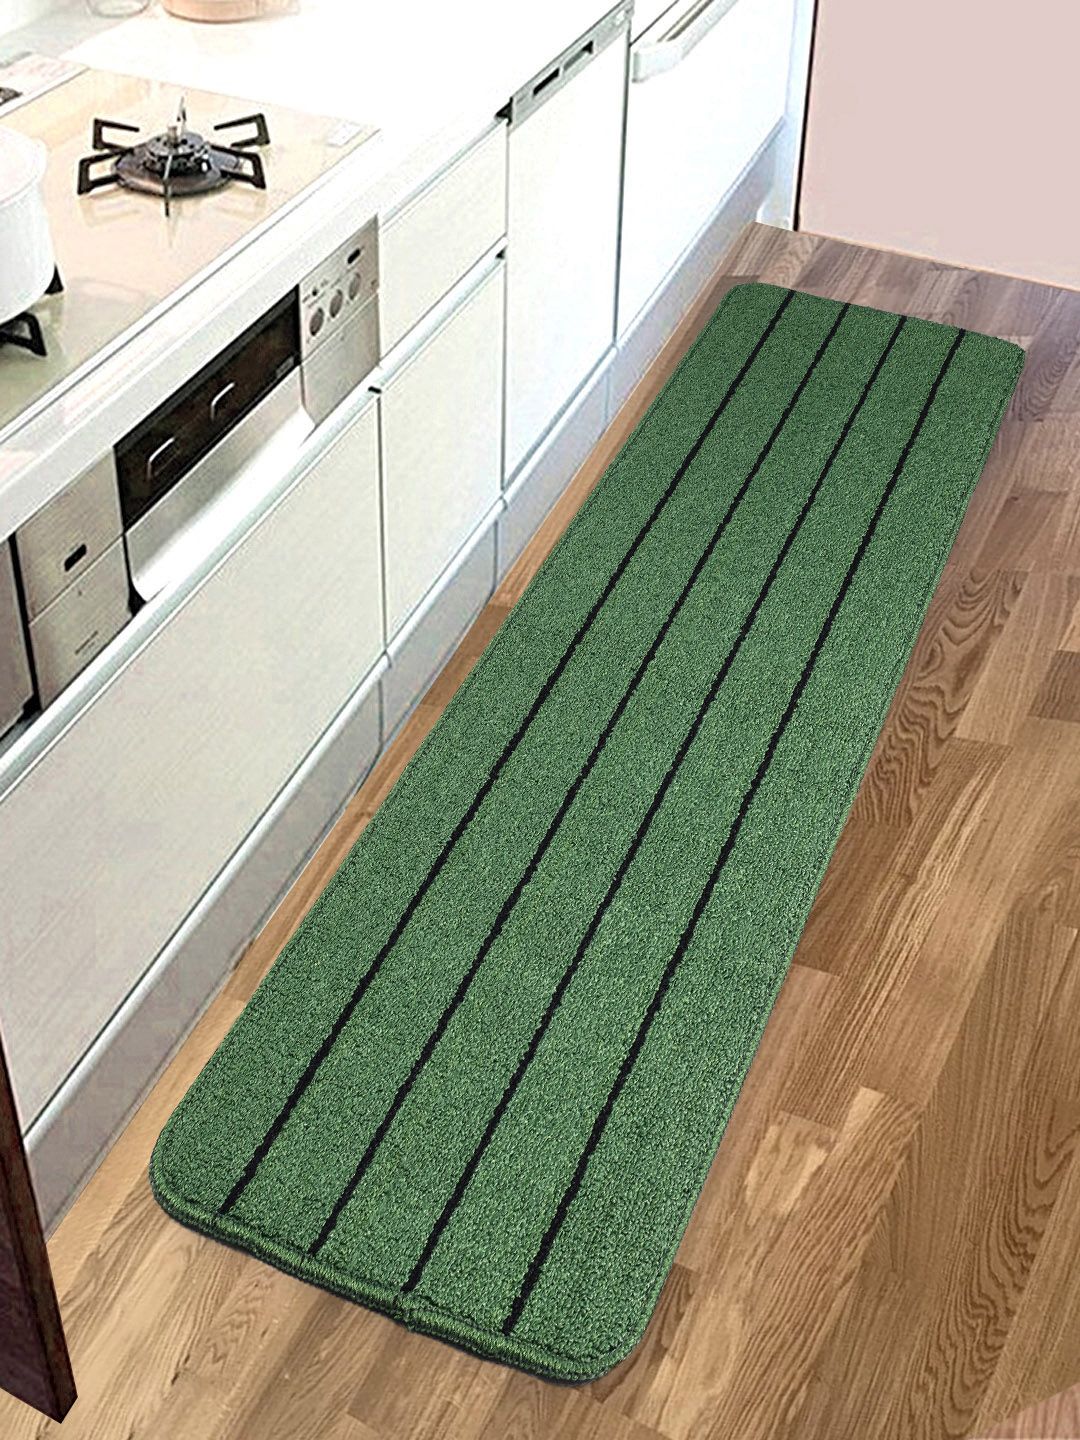 Saral Home Green & Black Striped Anti-Skid Floor Runner Price in India